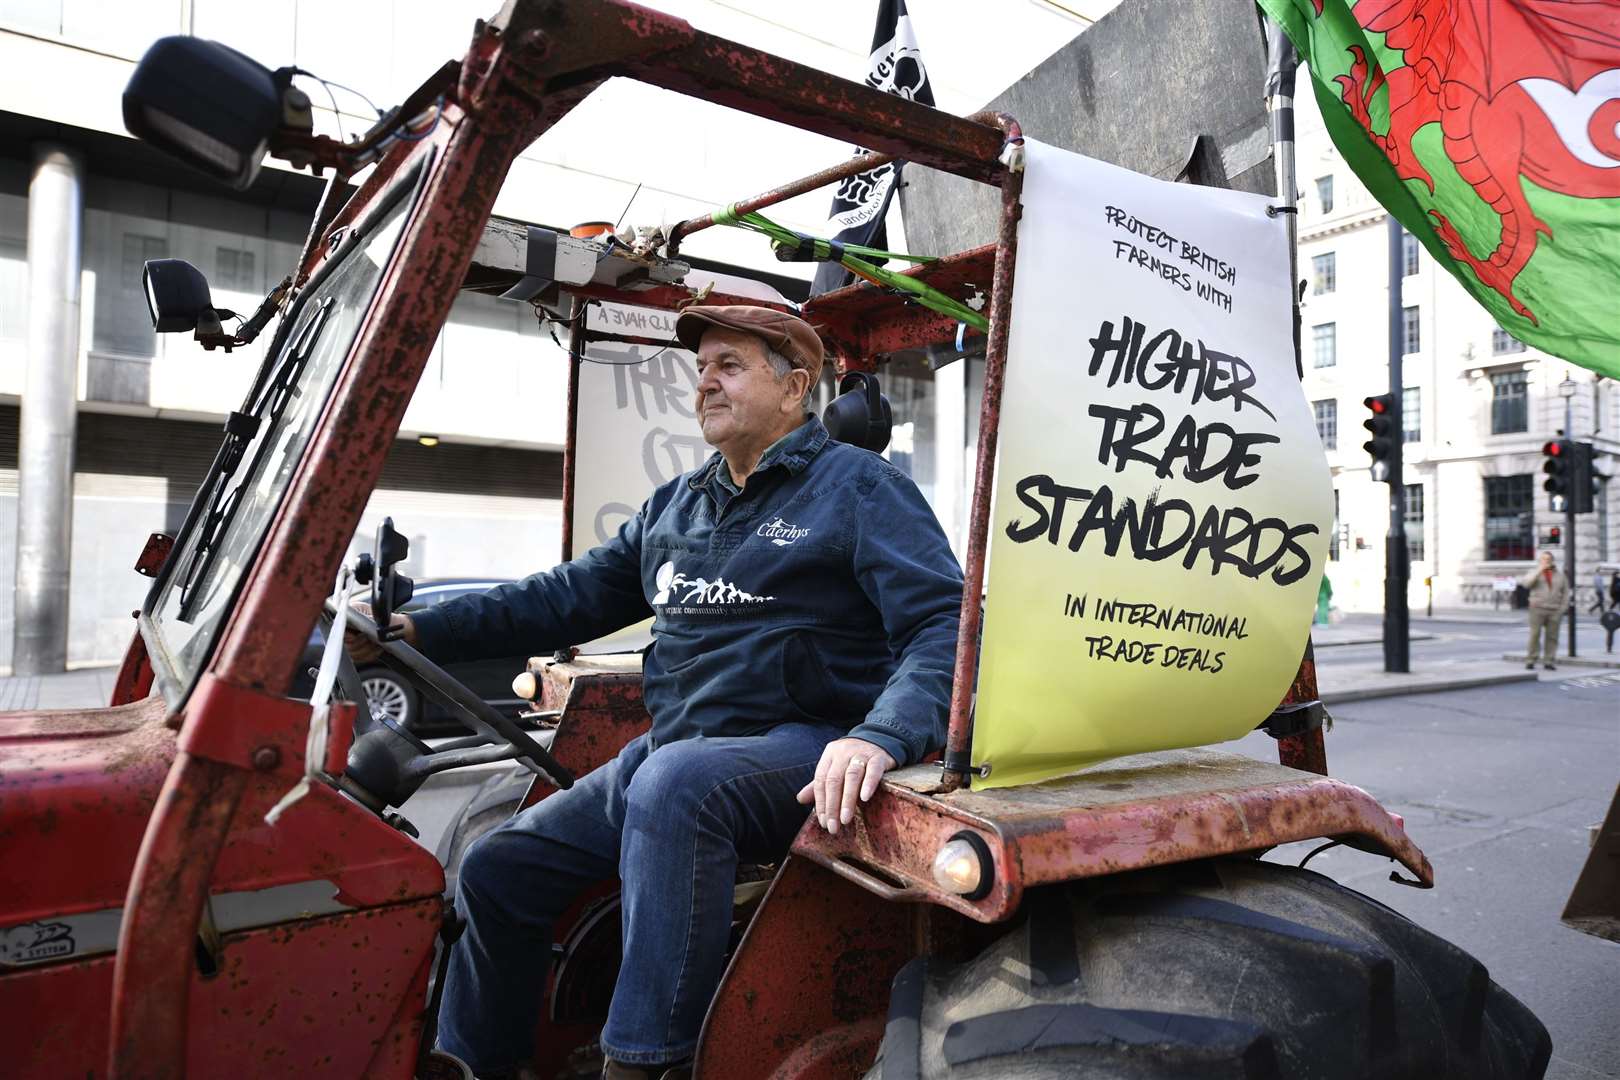 Farm workers and environment activists take part in a demonstration through central London (Beresford Hodge/PA)